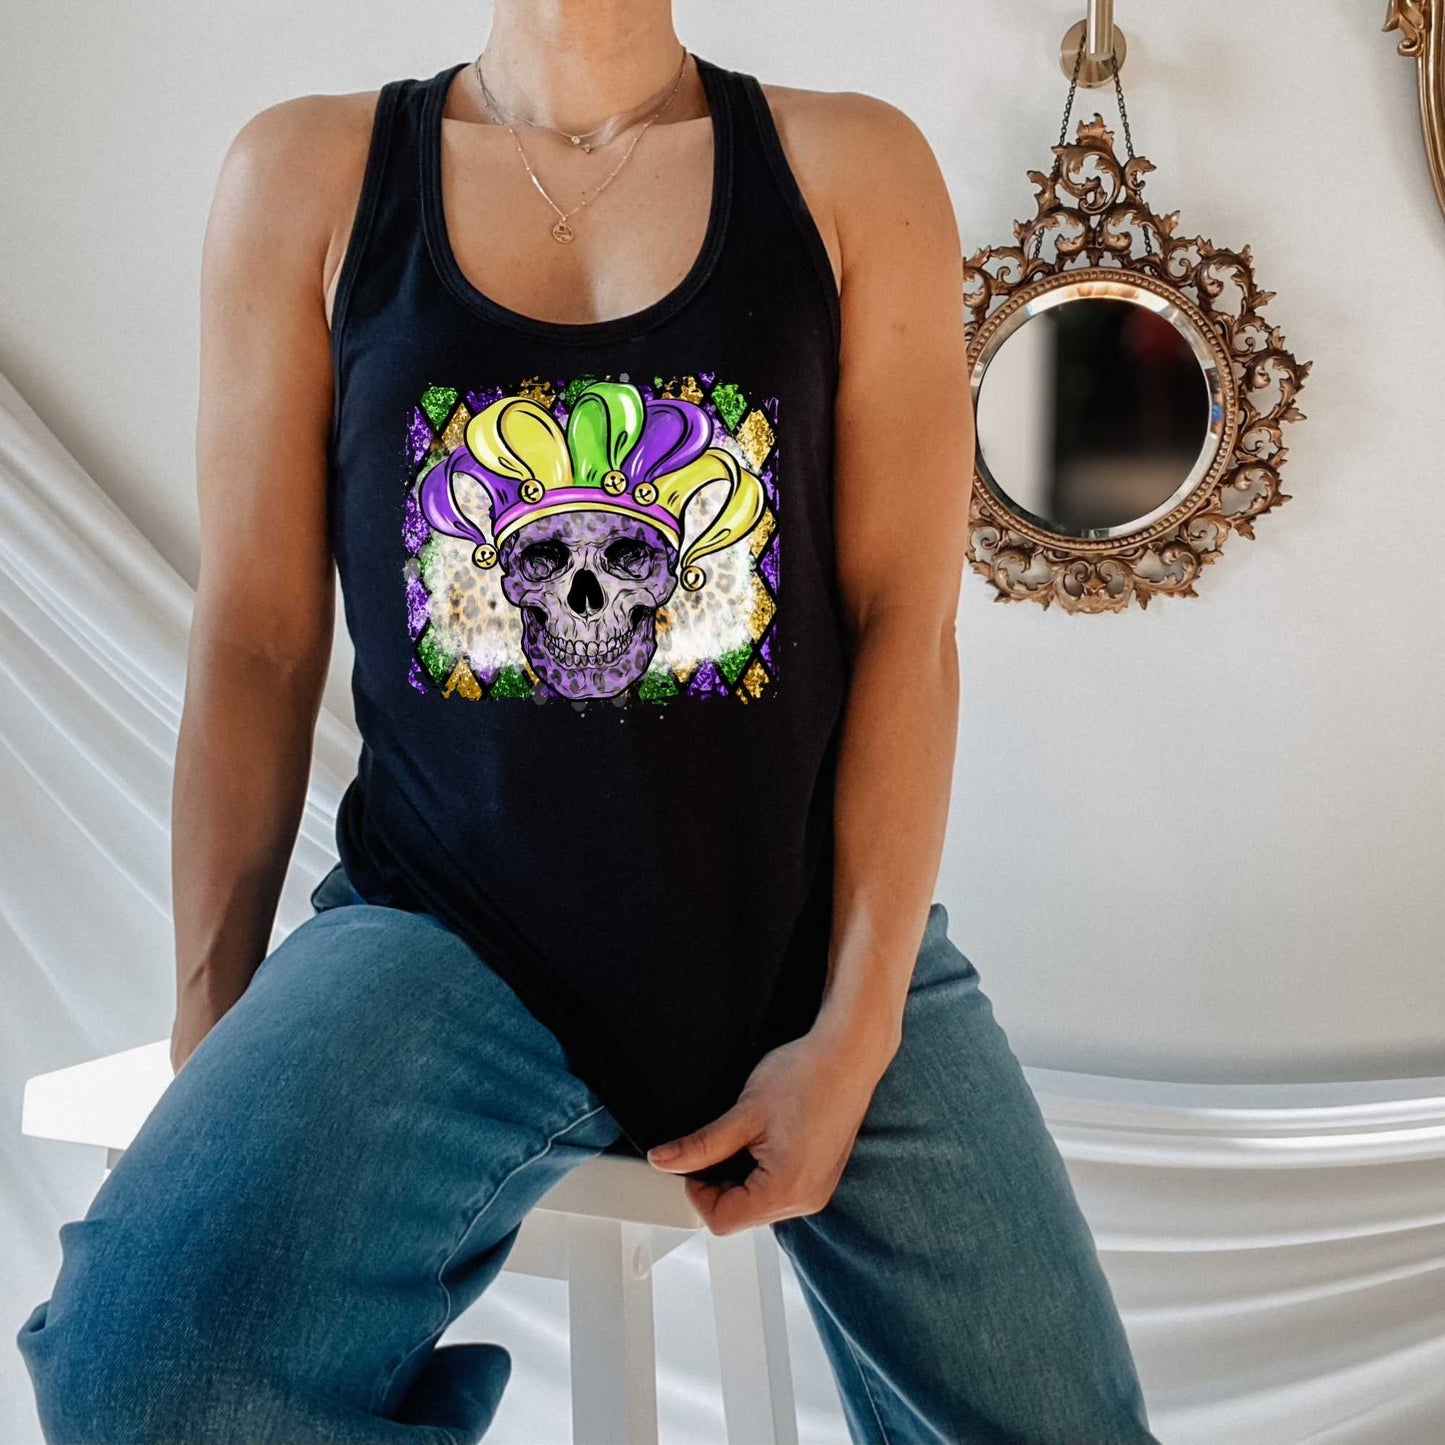 Skull Mardi Gras Shirt or Tank Top for Women and Men, Plus Sizes Available Up to 5XL